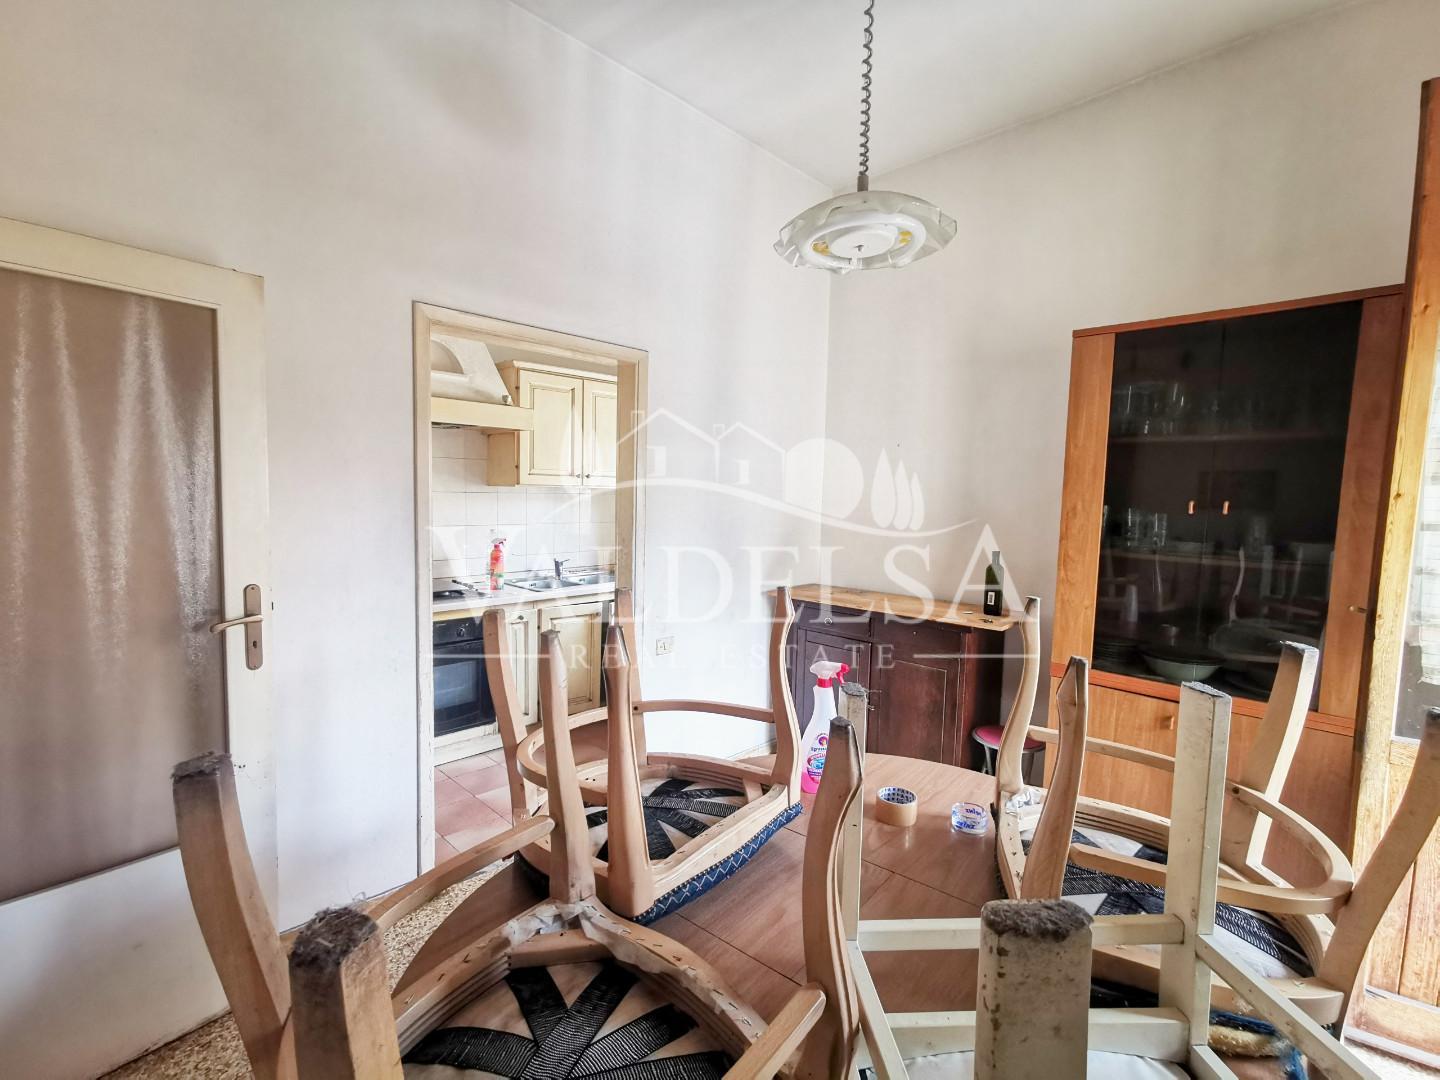 Apartment for sale, ref. 649